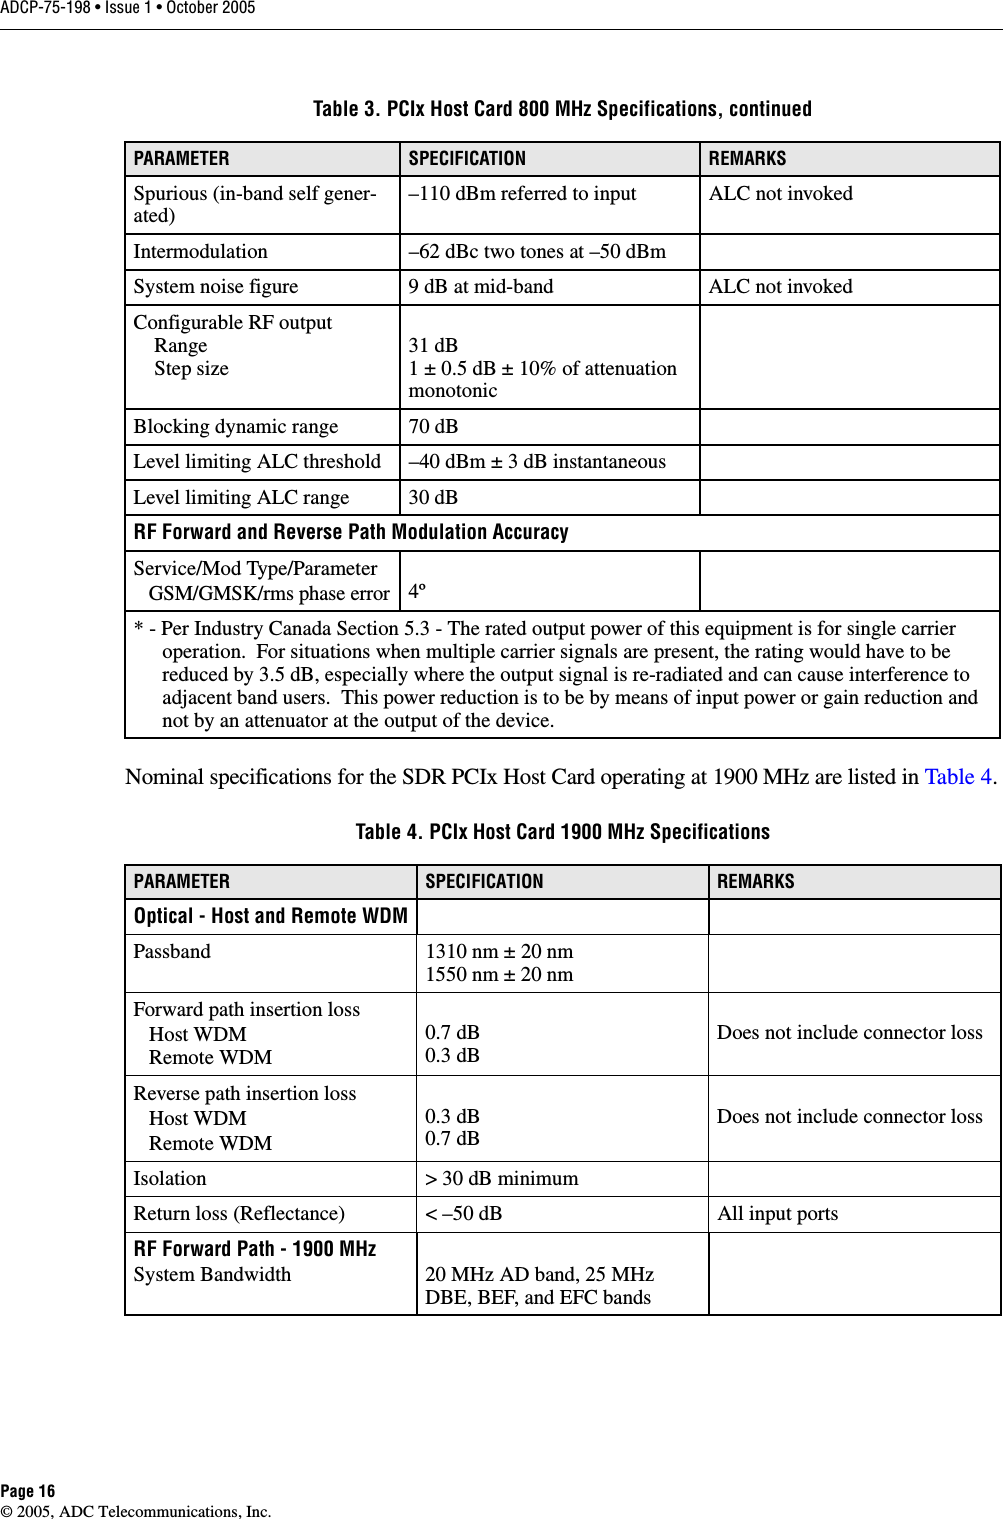 ADCP-75-198 • Issue 1 • October 2005Page 16© 2005, ADC Telecommunications, Inc.Nominal specifications for the SDR PCIx Host Card operating at 1900 MHz are listed in Table 4.Spurious (in-band self gener-ated)–110 dBm referred to input ALC not invokedIntermodulation –62 dBc two tones at –50 dBmSystem noise figure 9 dB at mid-band ALC not invokedConfigurable RF output    Range    Step size31 dB1 ± 0.5 dB ± 10% of attenuation monotonicBlocking dynamic range 70 dBLevel limiting ALC threshold –40 dBm ± 3 dB instantaneousLevel limiting ALC range 30 dBRF Forward and Reverse Path Modulation AccuracyService/Mod Type/ParameterGSM/GMSK/rms phase error4º* - Per Industry Canada Section 5.3 - The rated output power of this equipment is for single carrier operation.  For situations when multiple carrier signals are present, the rating would have to be reduced by 3.5 dB, especially where the output signal is re-radiated and can cause interference to adjacent band users.  This power reduction is to be by means of input power or gain reduction and not by an attenuator at the output of the device.Table 4. PCIx Host Card 1900 MHz SpecificationsPARAMETER SPECIFICATION REMARKSOptical - Host and Remote WDMPassband 1310 nm ± 20 nm1550 nm ± 20 nmForward path insertion loss   Host WDM   Remote WDM0.7 dB0.3 dBDoes not include connector lossReverse path insertion loss   Host WDM   Remote WDM0.3 dB0.7 dBDoes not include connector lossIsolation &gt; 30 dB minimumReturn loss (Reflectance) &lt; –50 dB All input portsRF Forward Path - 1900 MHzSystem Bandwidth 20 MHz AD band, 25 MHzDBE, BEF, and EFC bandsTable 3. PCIx Host Card 800 MHz Specifications, continuedPARAMETER SPECIFICATION REMARKS